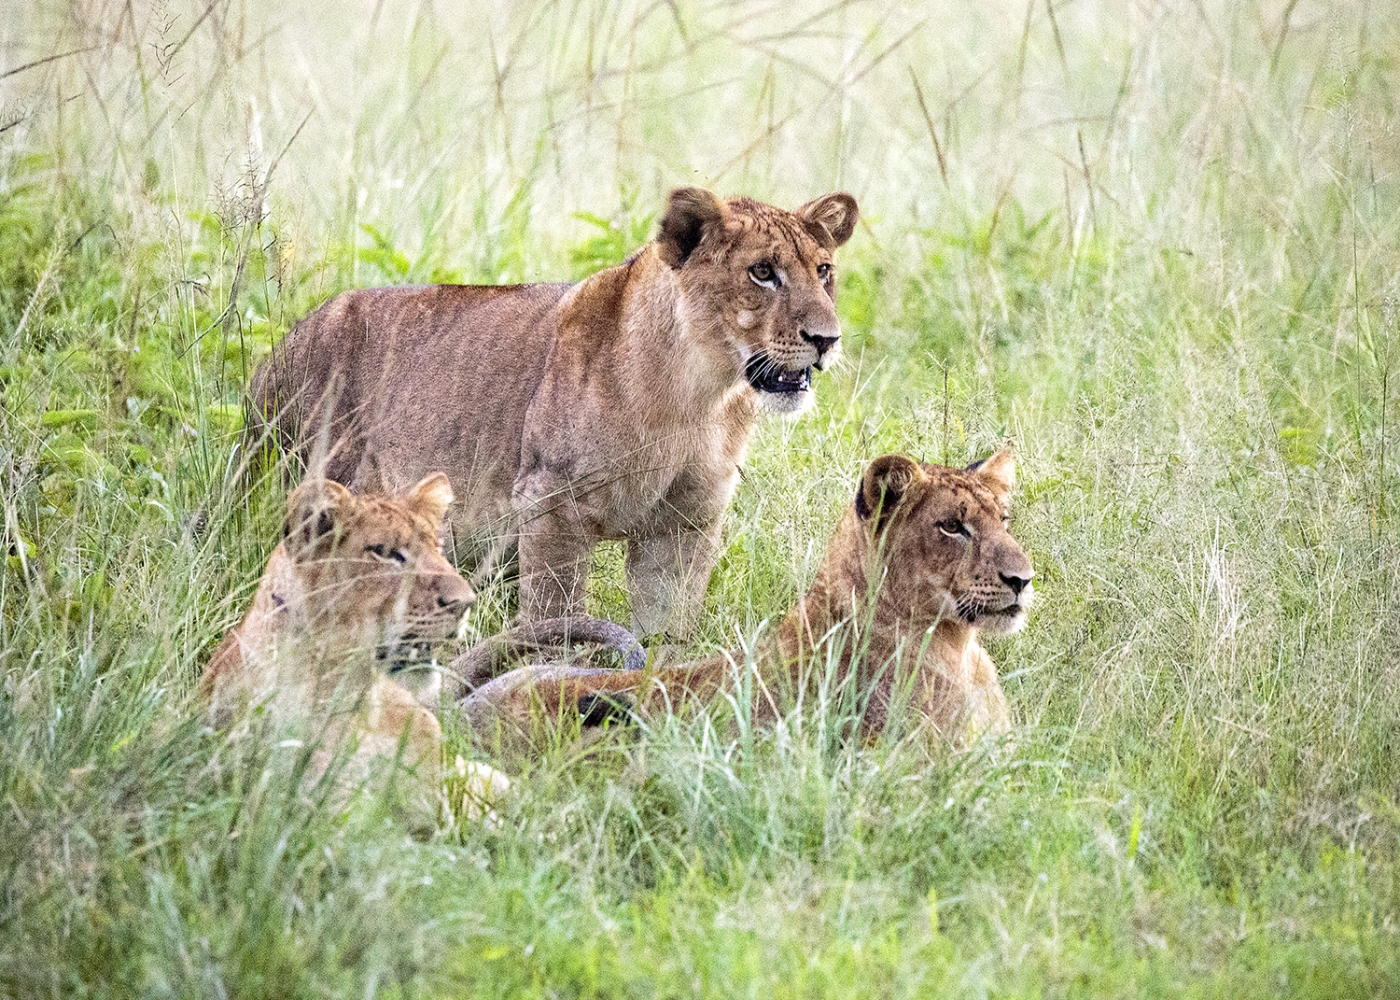 From The Highland Forests To Chance Encounters On The Plains Of Queen Elizabeth National Park - Discovering Uganda